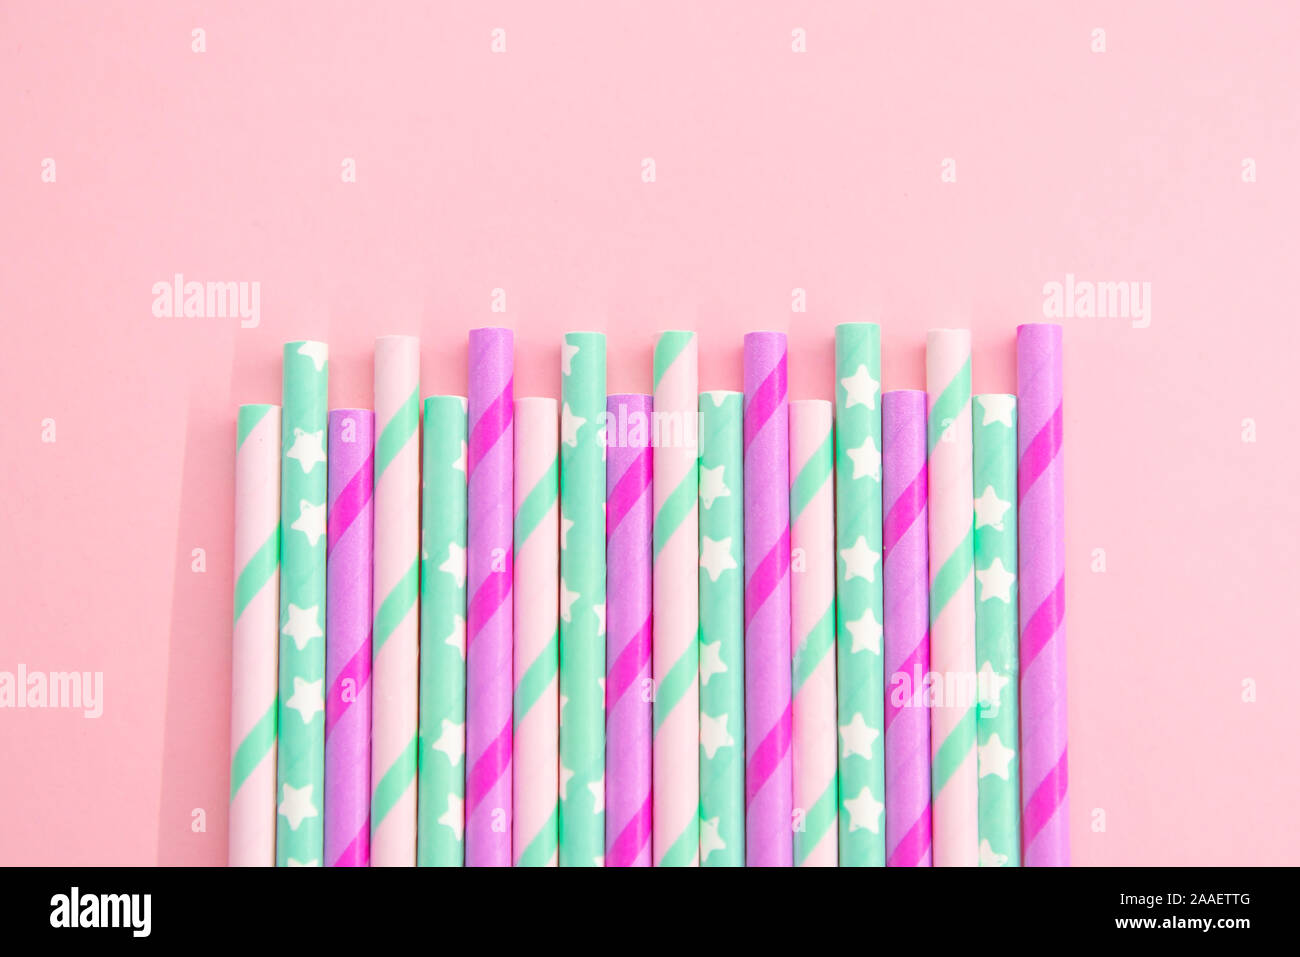 Colorful Paper coctail tubes on the pink background. Eco friendly. Zero Waste. Isolated Stock Photo